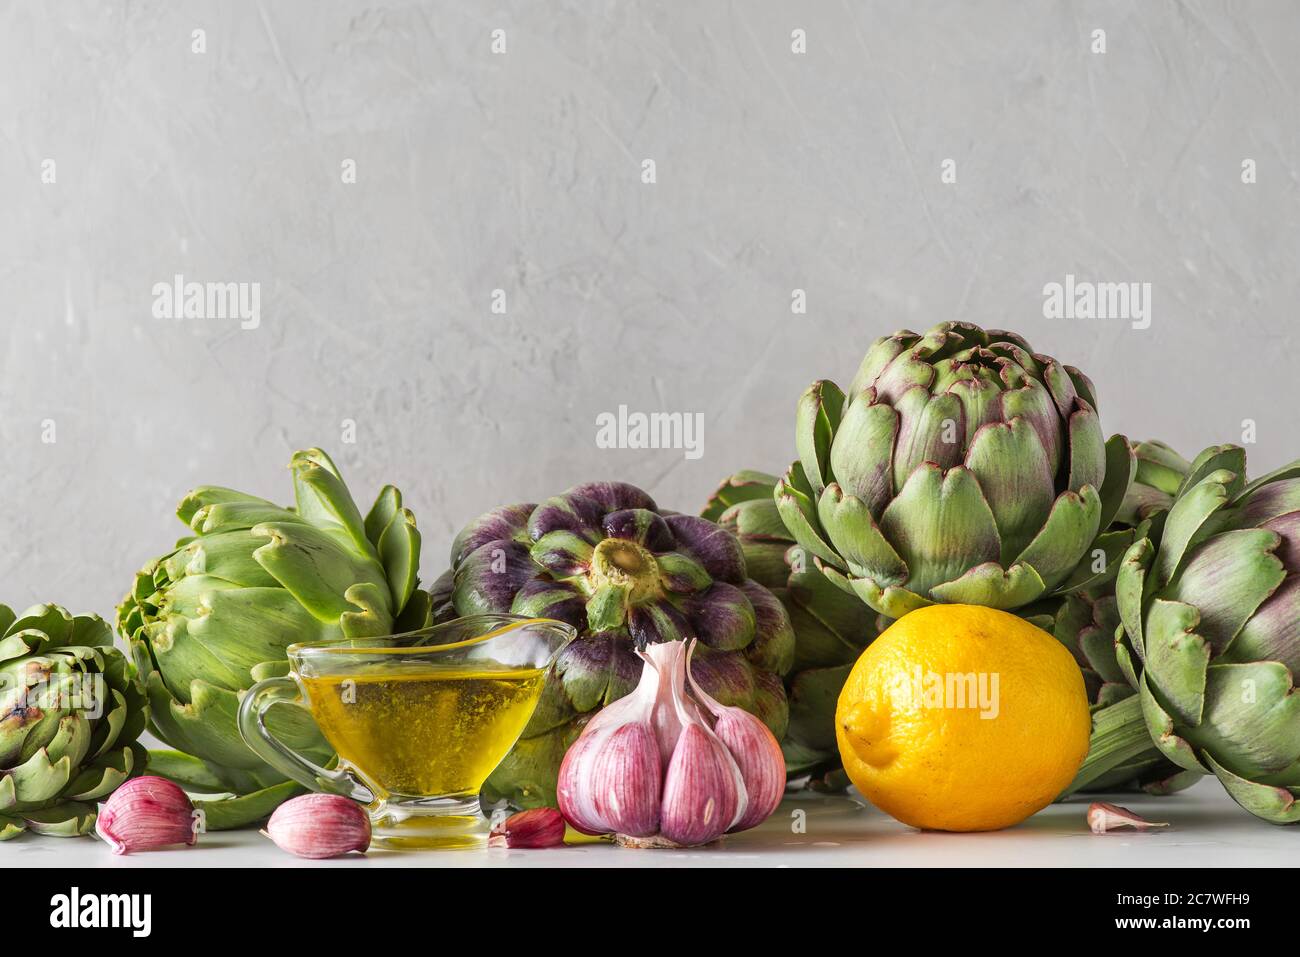 Healthy vegan food concept. Fresh ripe artichokes with olive oil, lemon and garlic on concrete background. Italian cuisine cooking background. close u Stock Photo